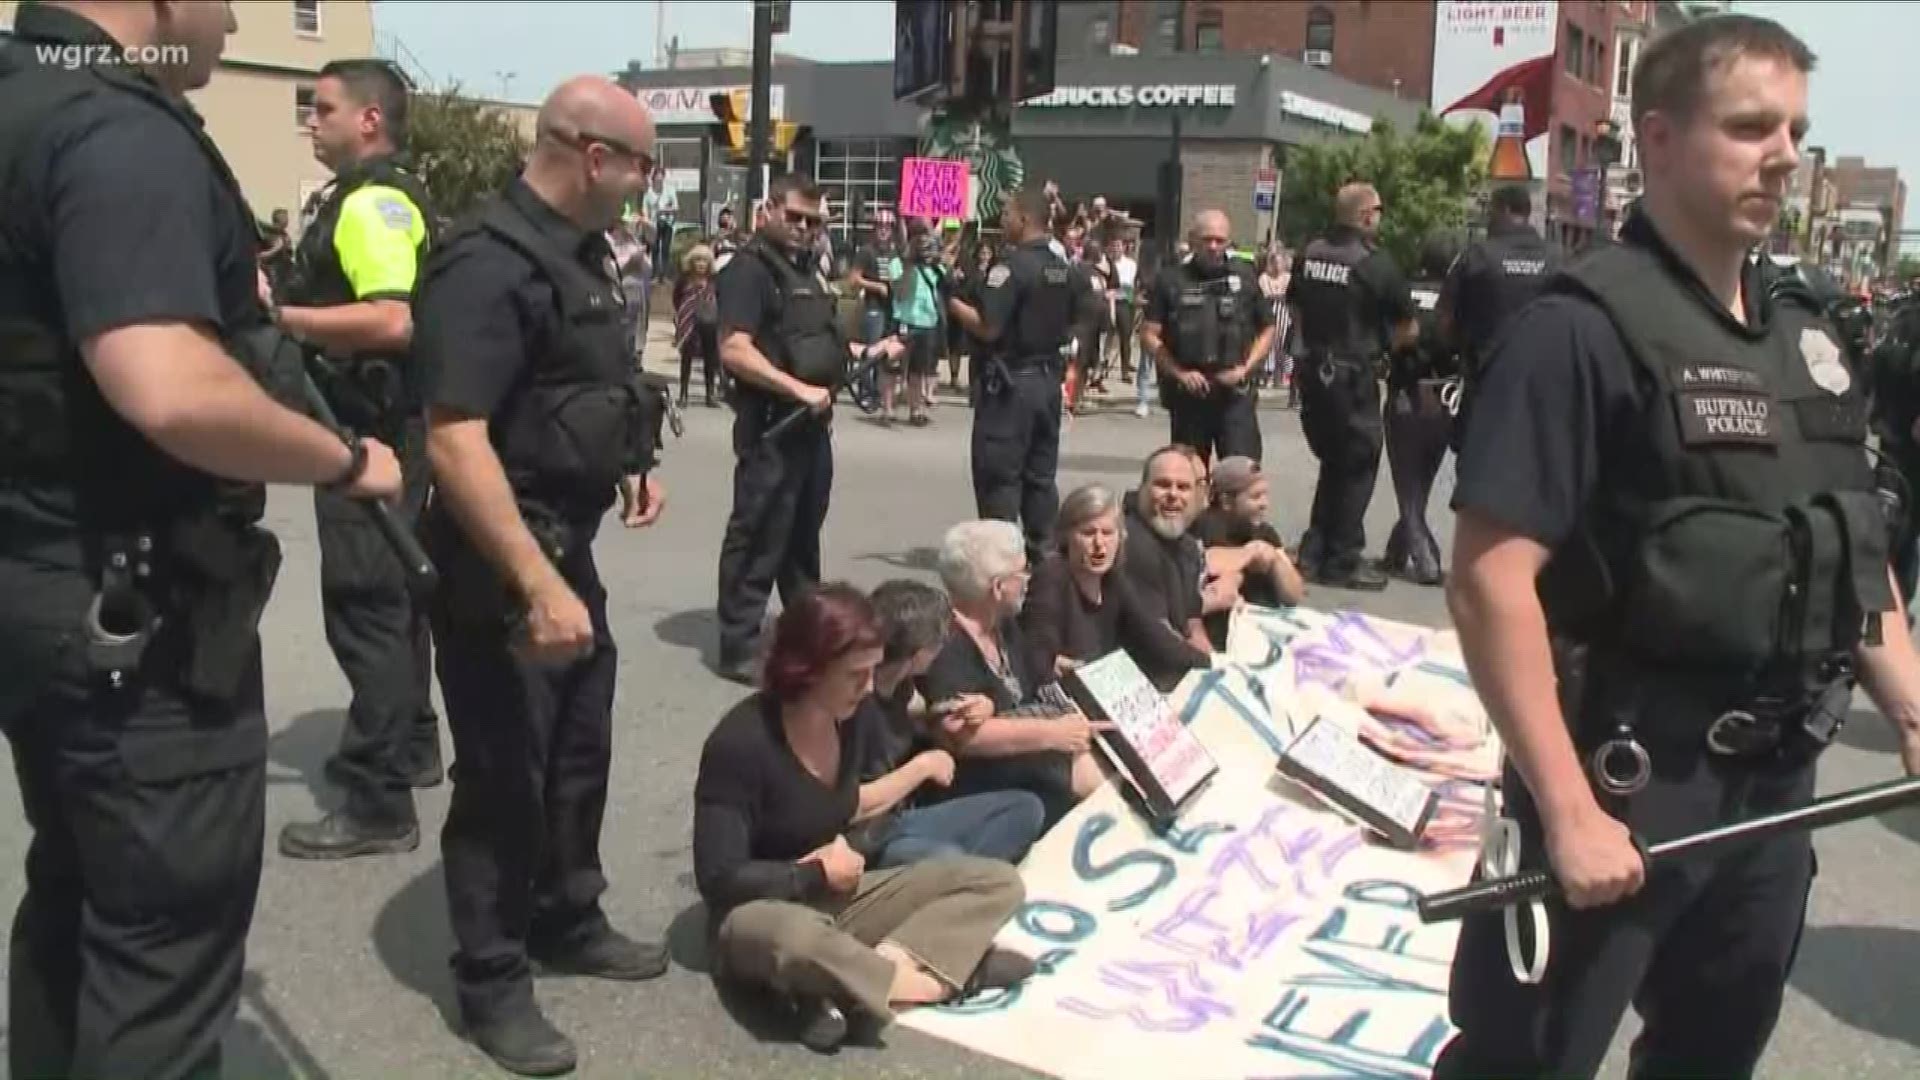 Protesters arrested for blocking intersection